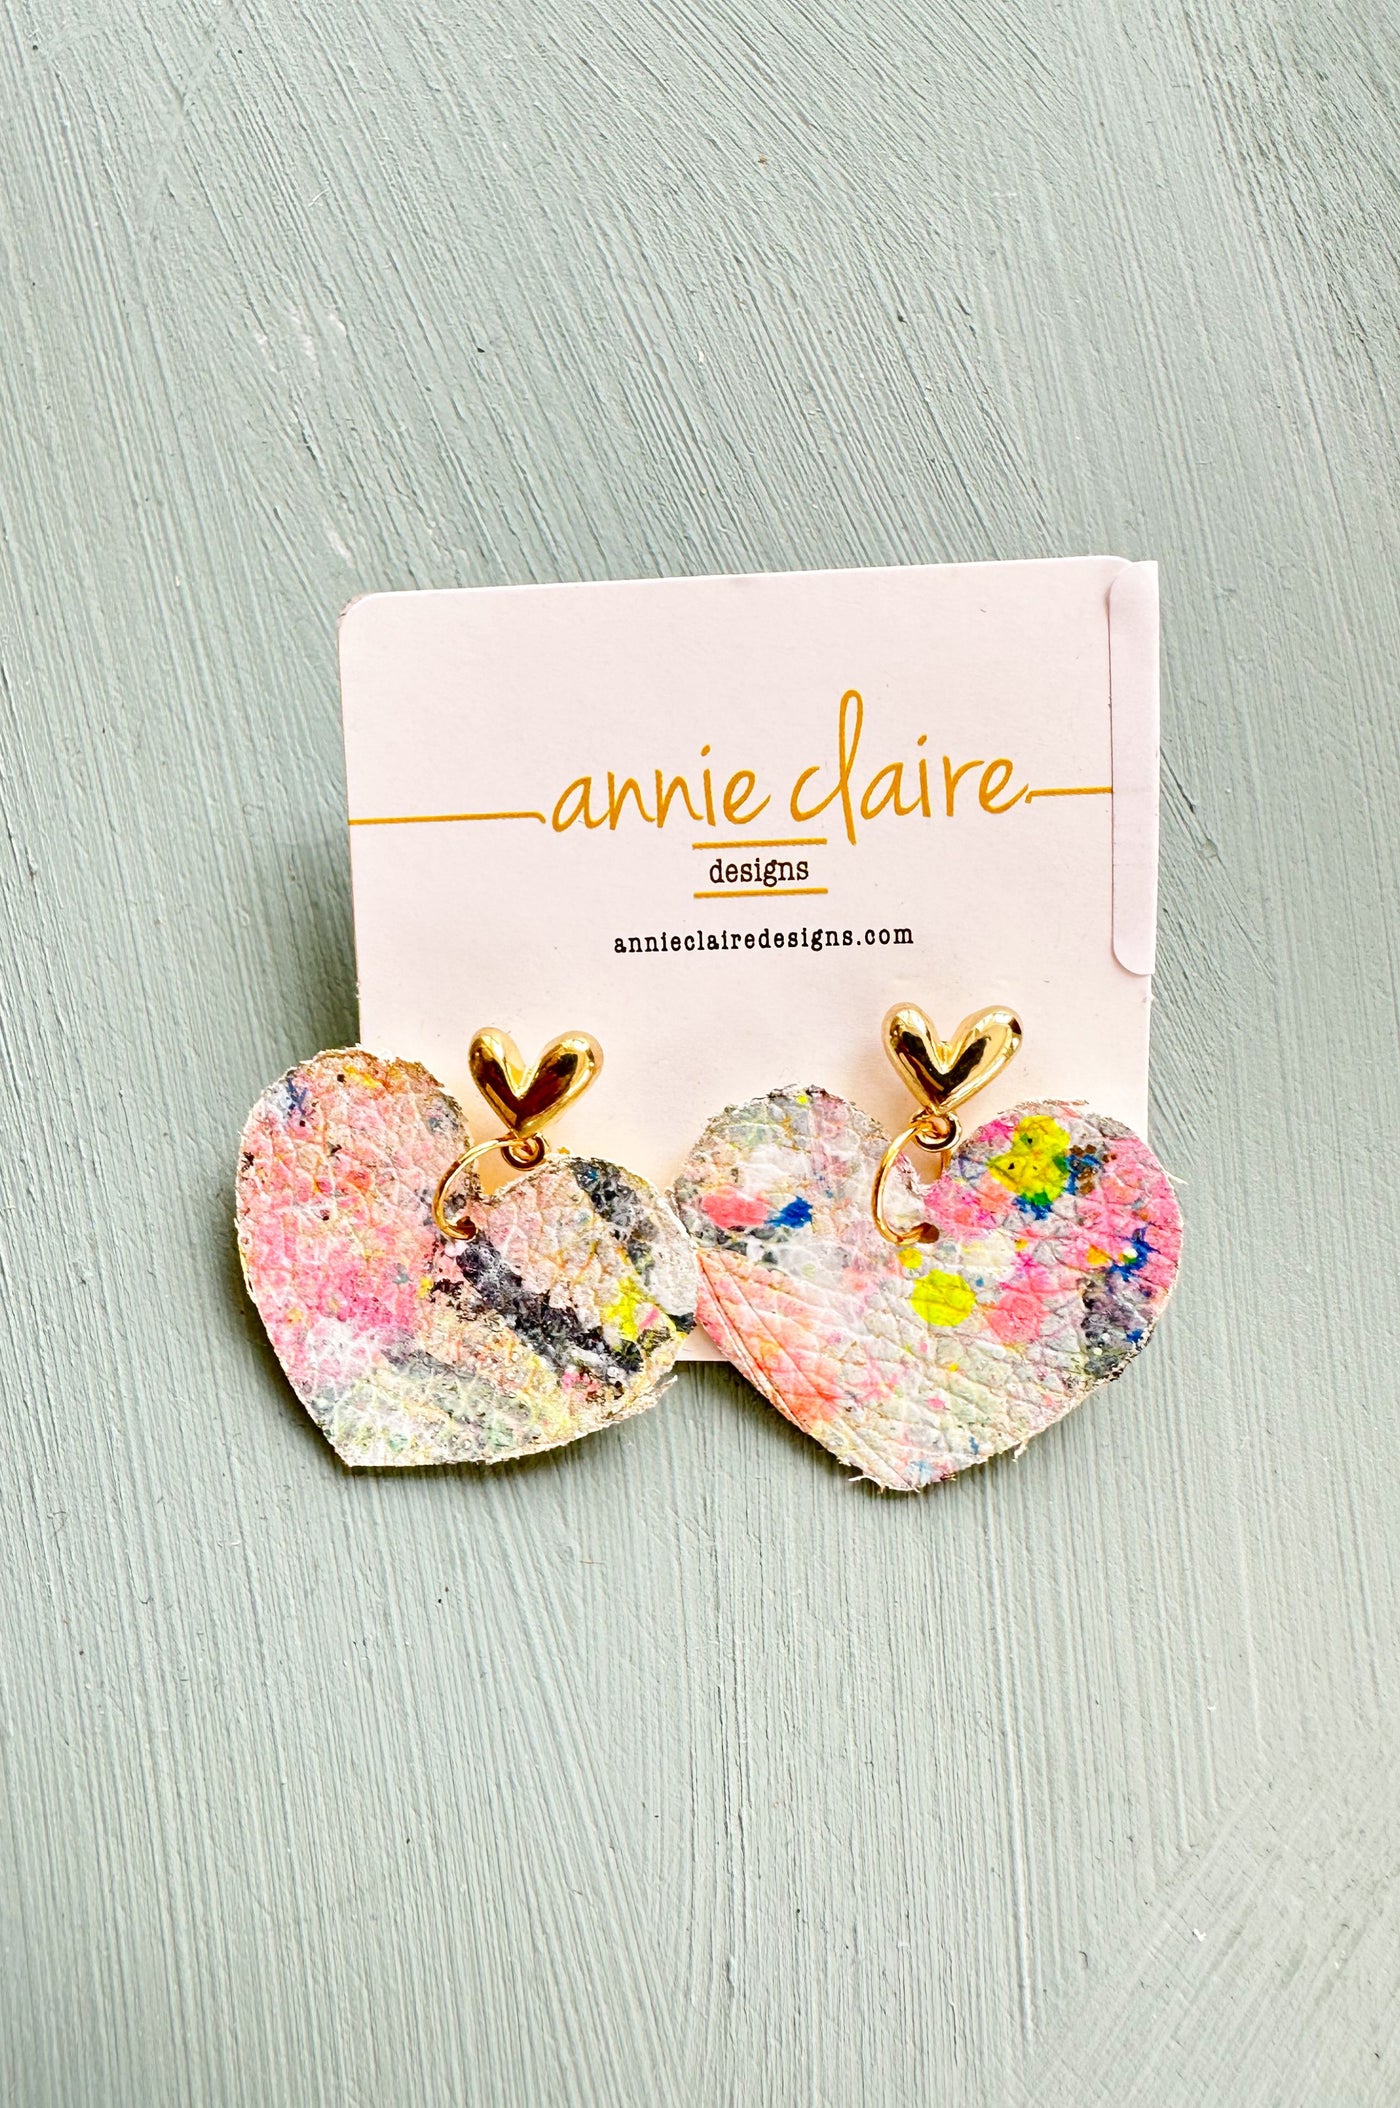 Hand Painted Heart Earrings by Annie Claire Designs + Samantha Morgan